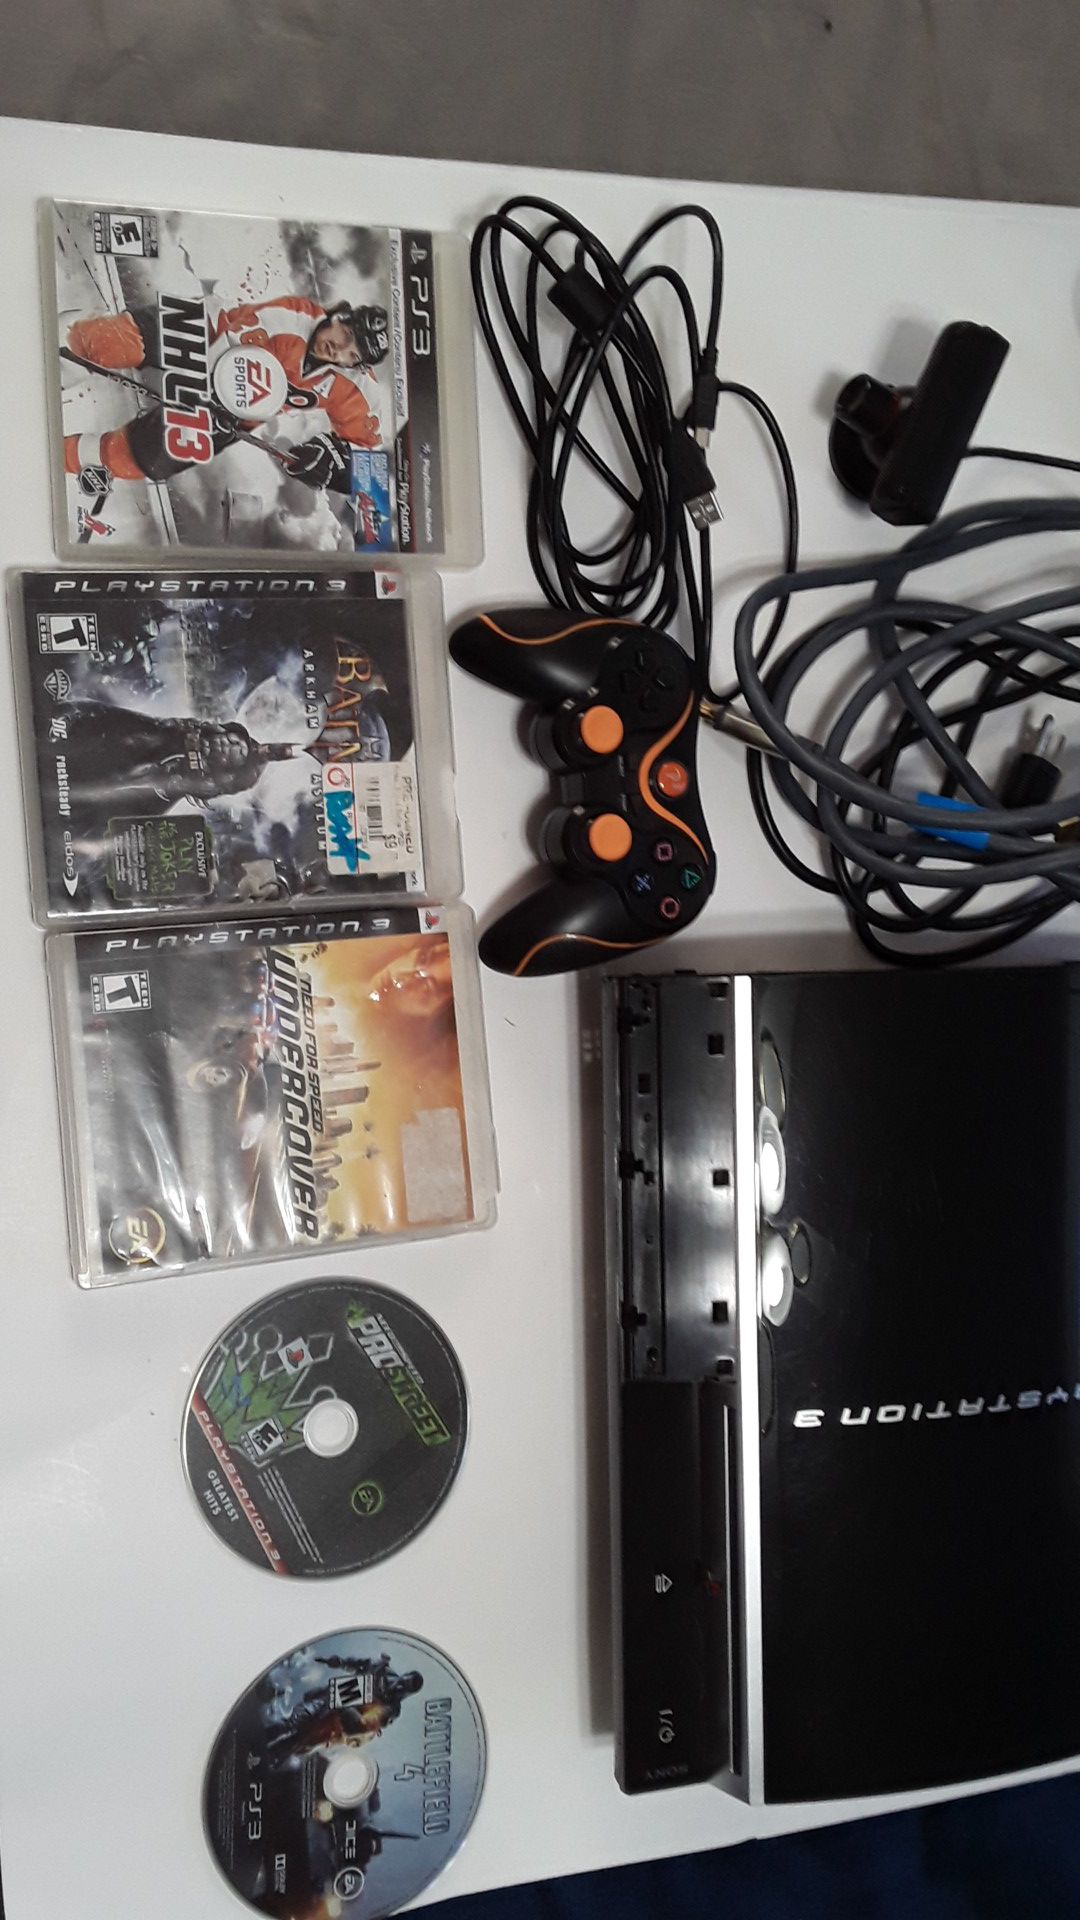 Playstation 3 and 5 games